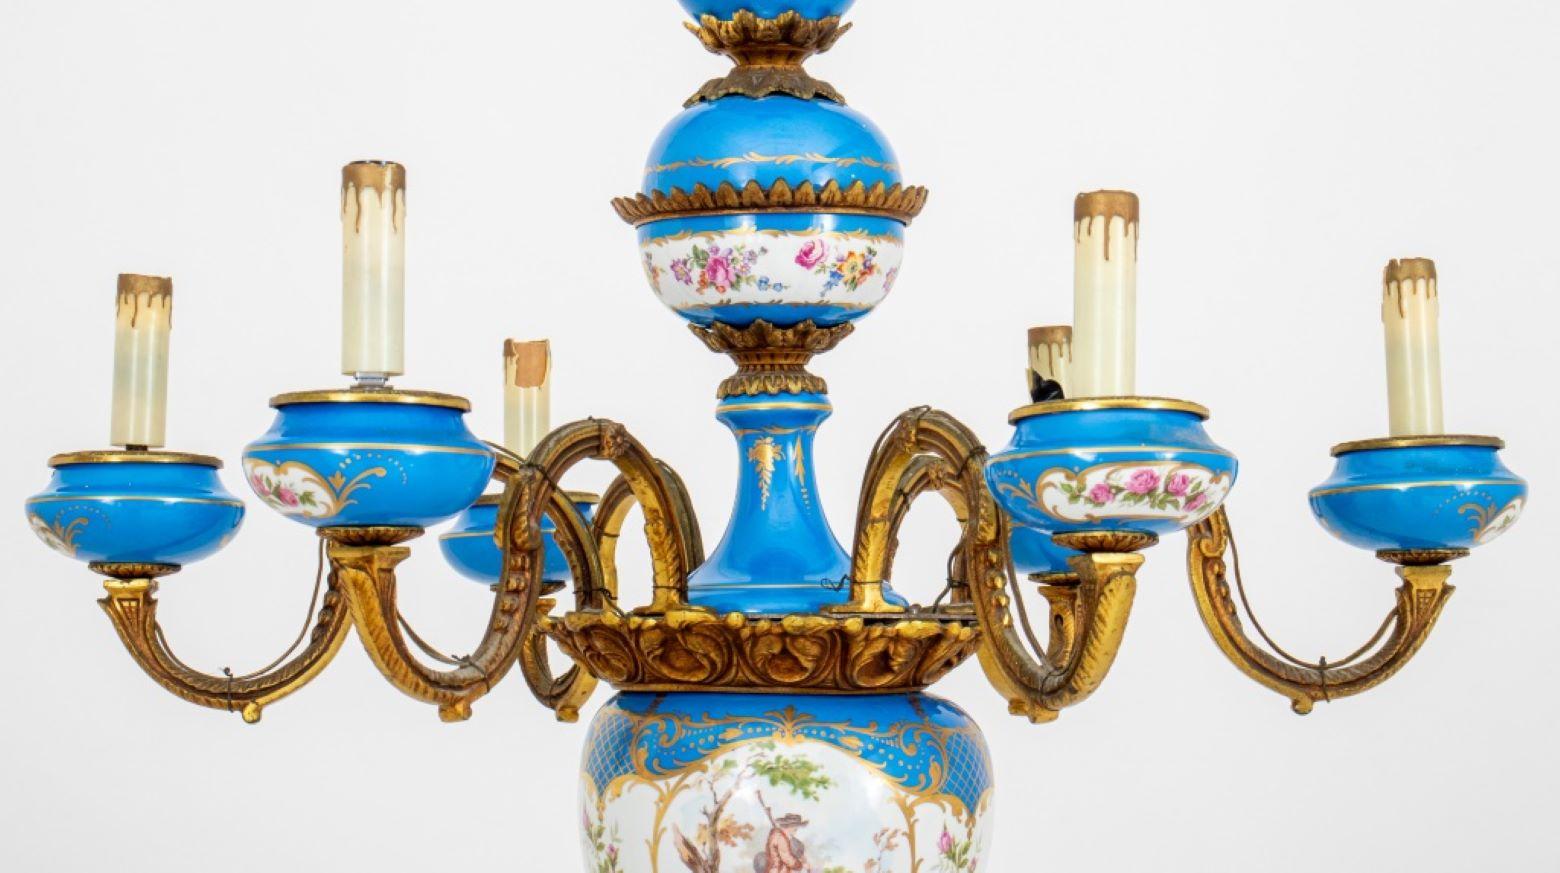 Belle Epoque Sevres Six-Light Porcelain and Ormolu Chandelier, 20th century, with hand-painted courtship scenes and gilt accents, porcelain marked and signed. 44